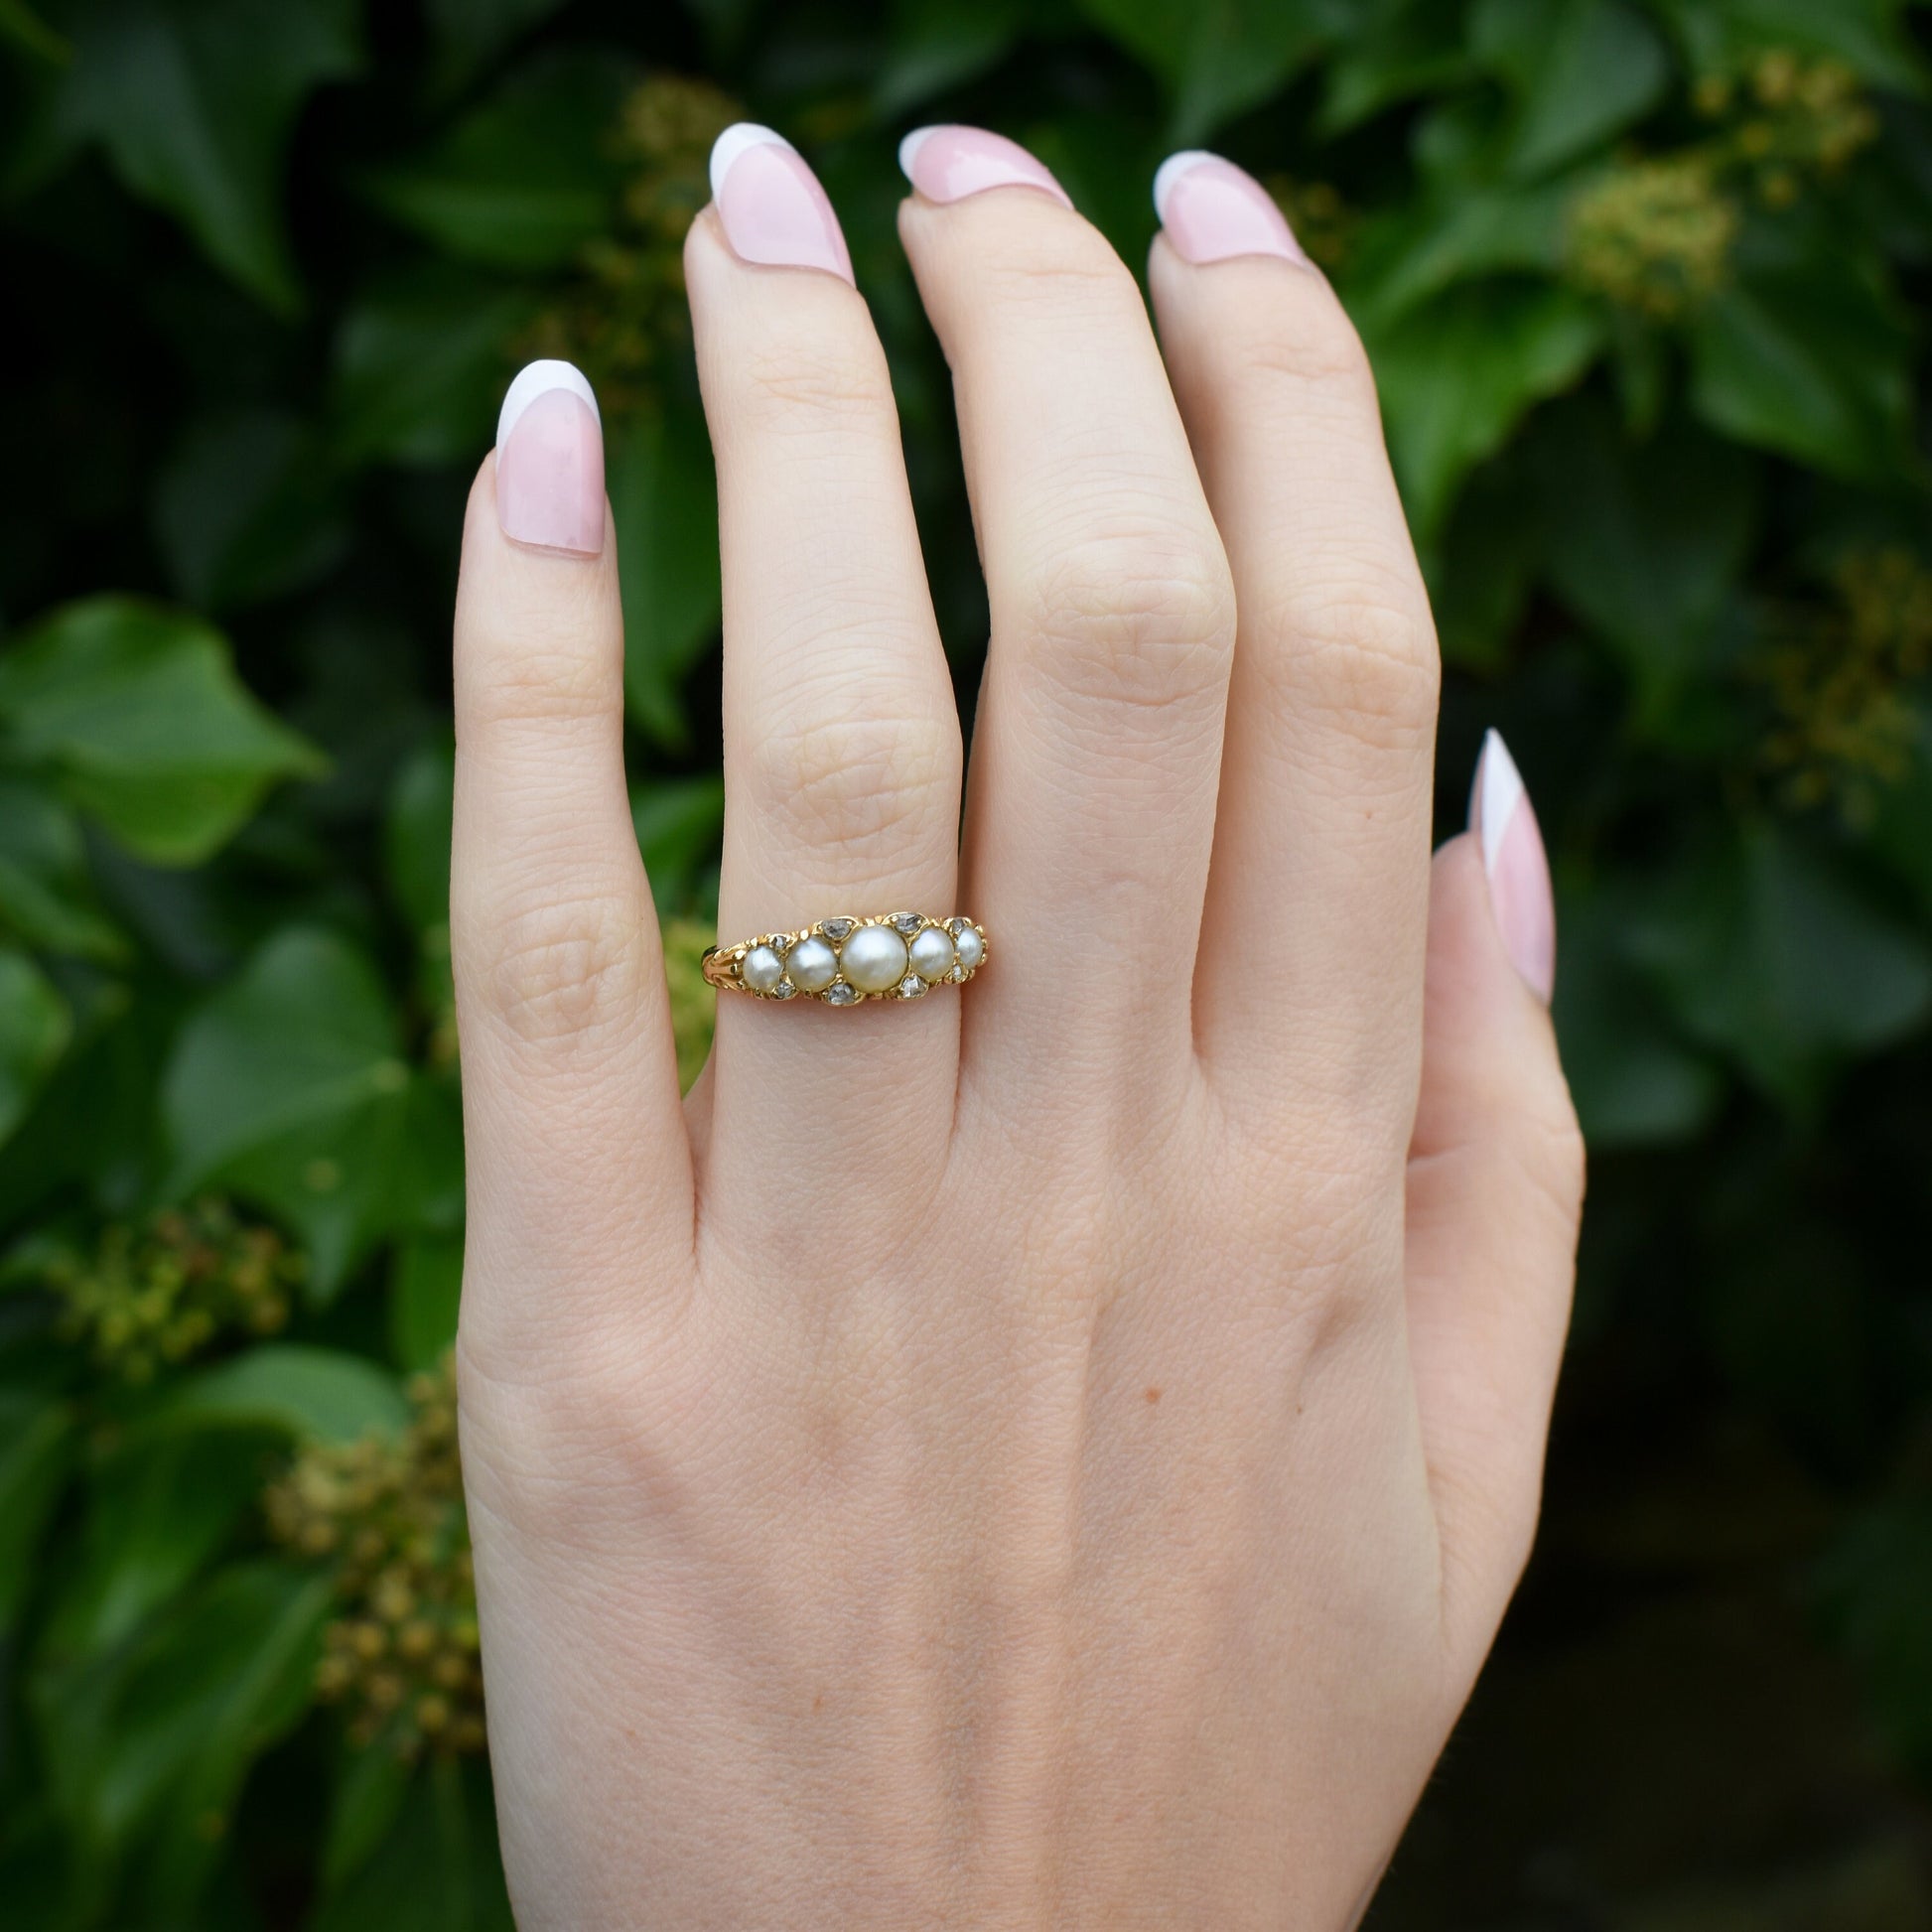 Antique: A Pearl Ring in 18 ct Gold, Half-Hoop Stacker